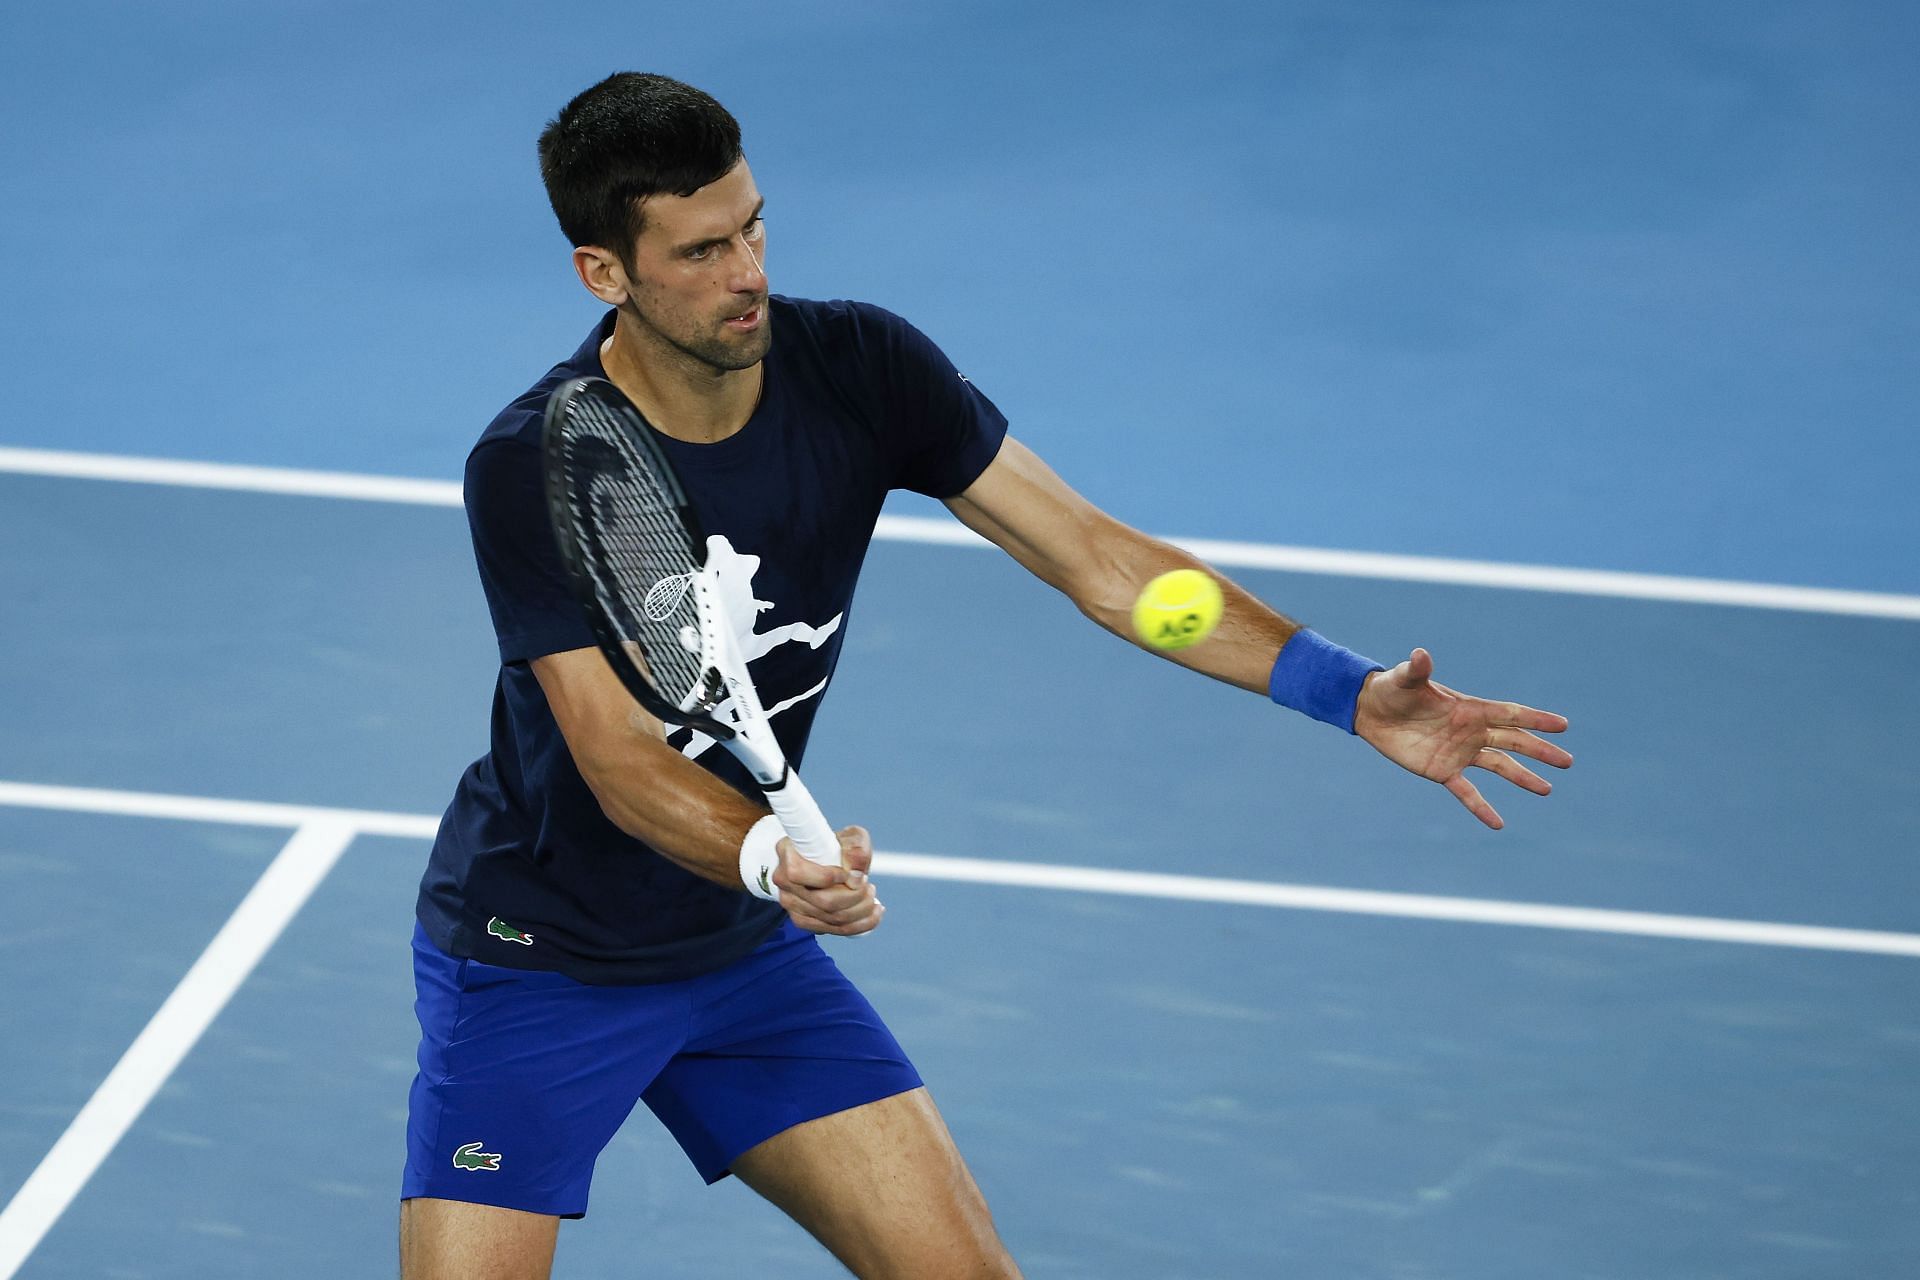 Djokovic in a practice session ahead of the 2022 Australian Open